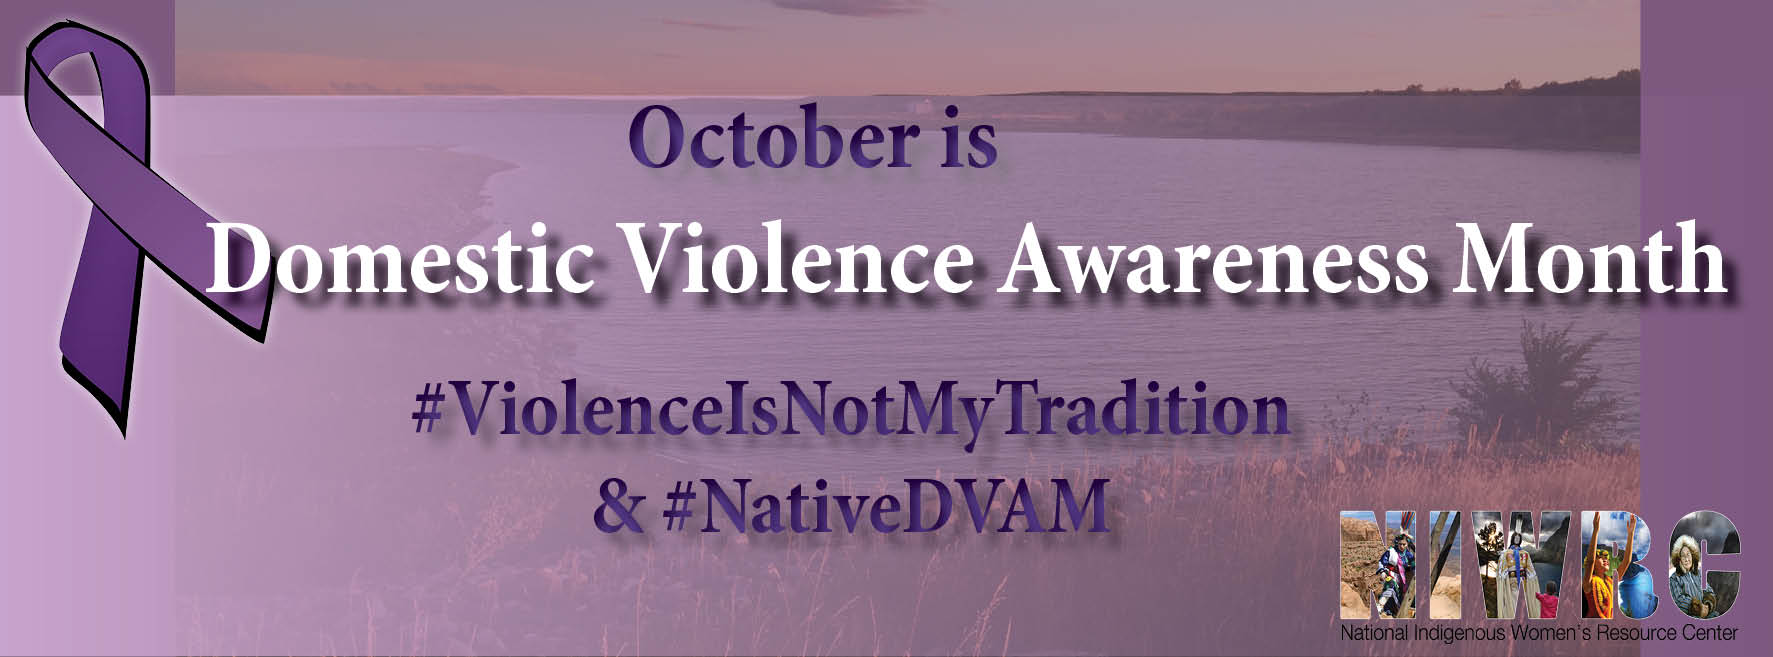 NIWRC Celebrates the 30th Anniversary of Domestic Violence Awareness Month in October